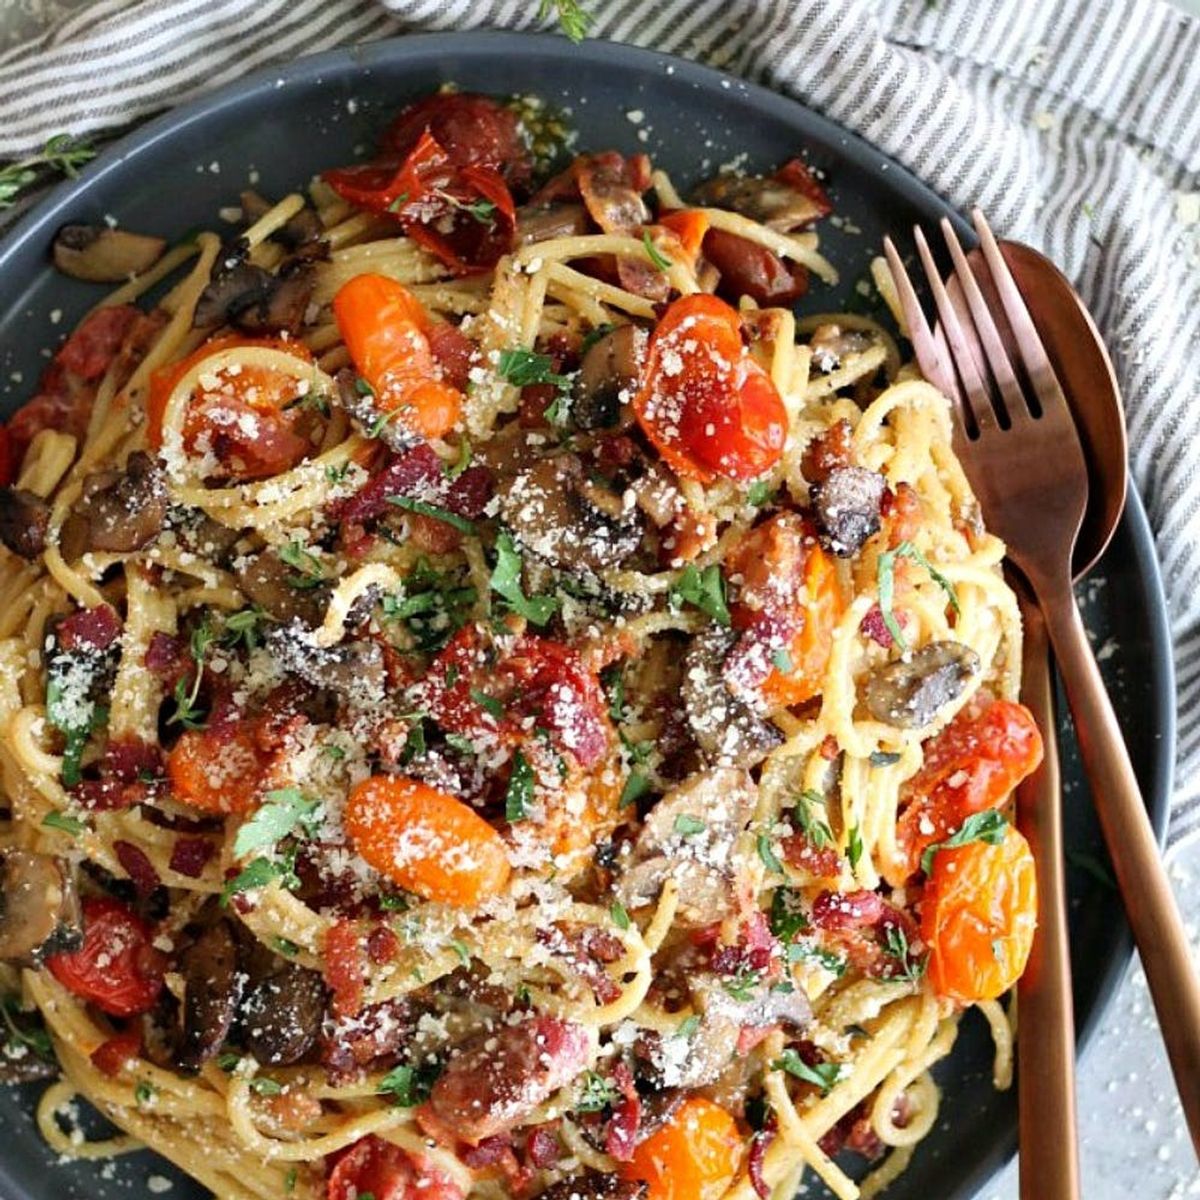 Simple Spaghetti Recipes to Add to Your Dinner Rotation